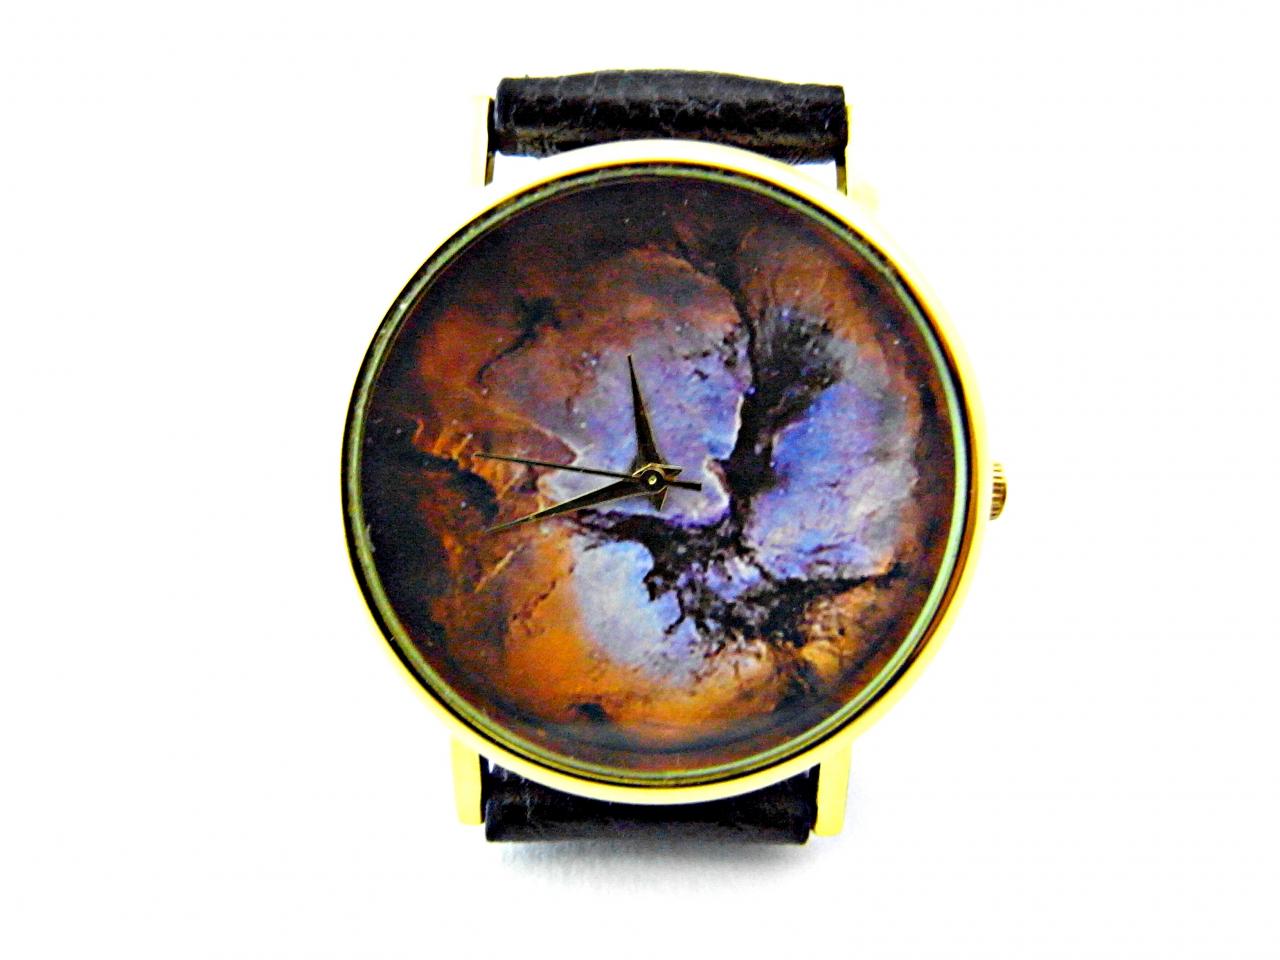 Galaxy Space Leather Wrist Watches, Woman Man Lady Unisex Watch, Genuine Leather Handmade Unique Watch #18